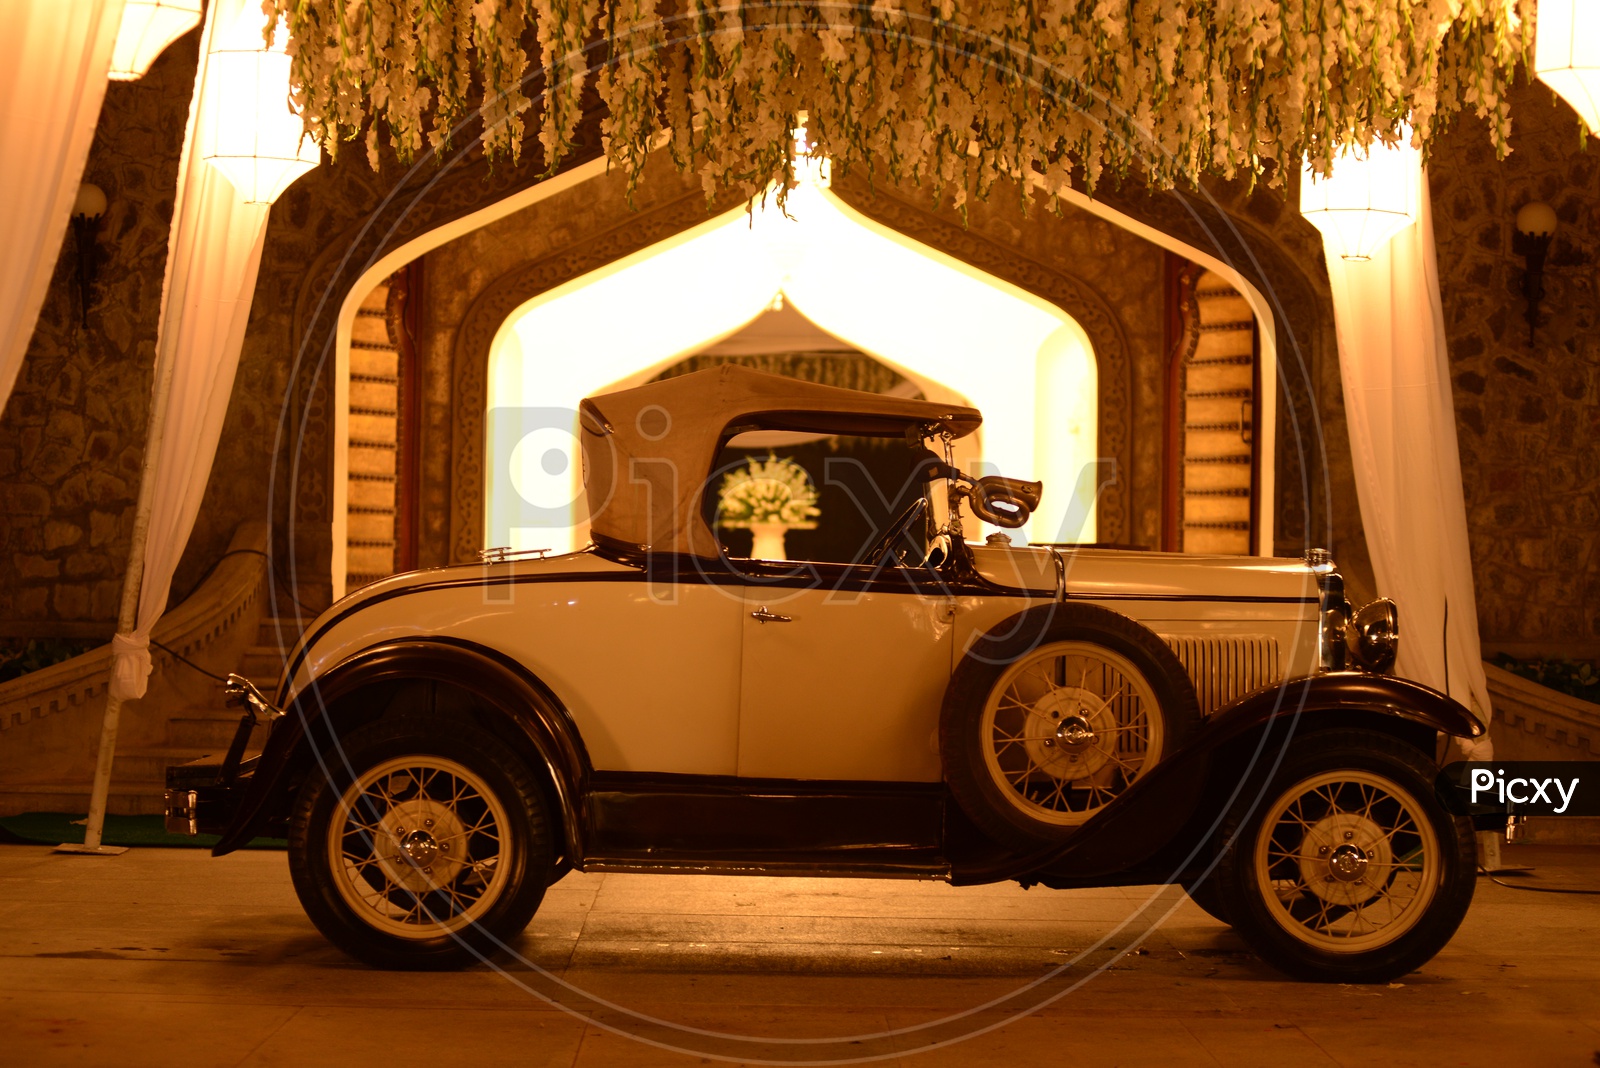 An Old Vintage Car At a House Compound